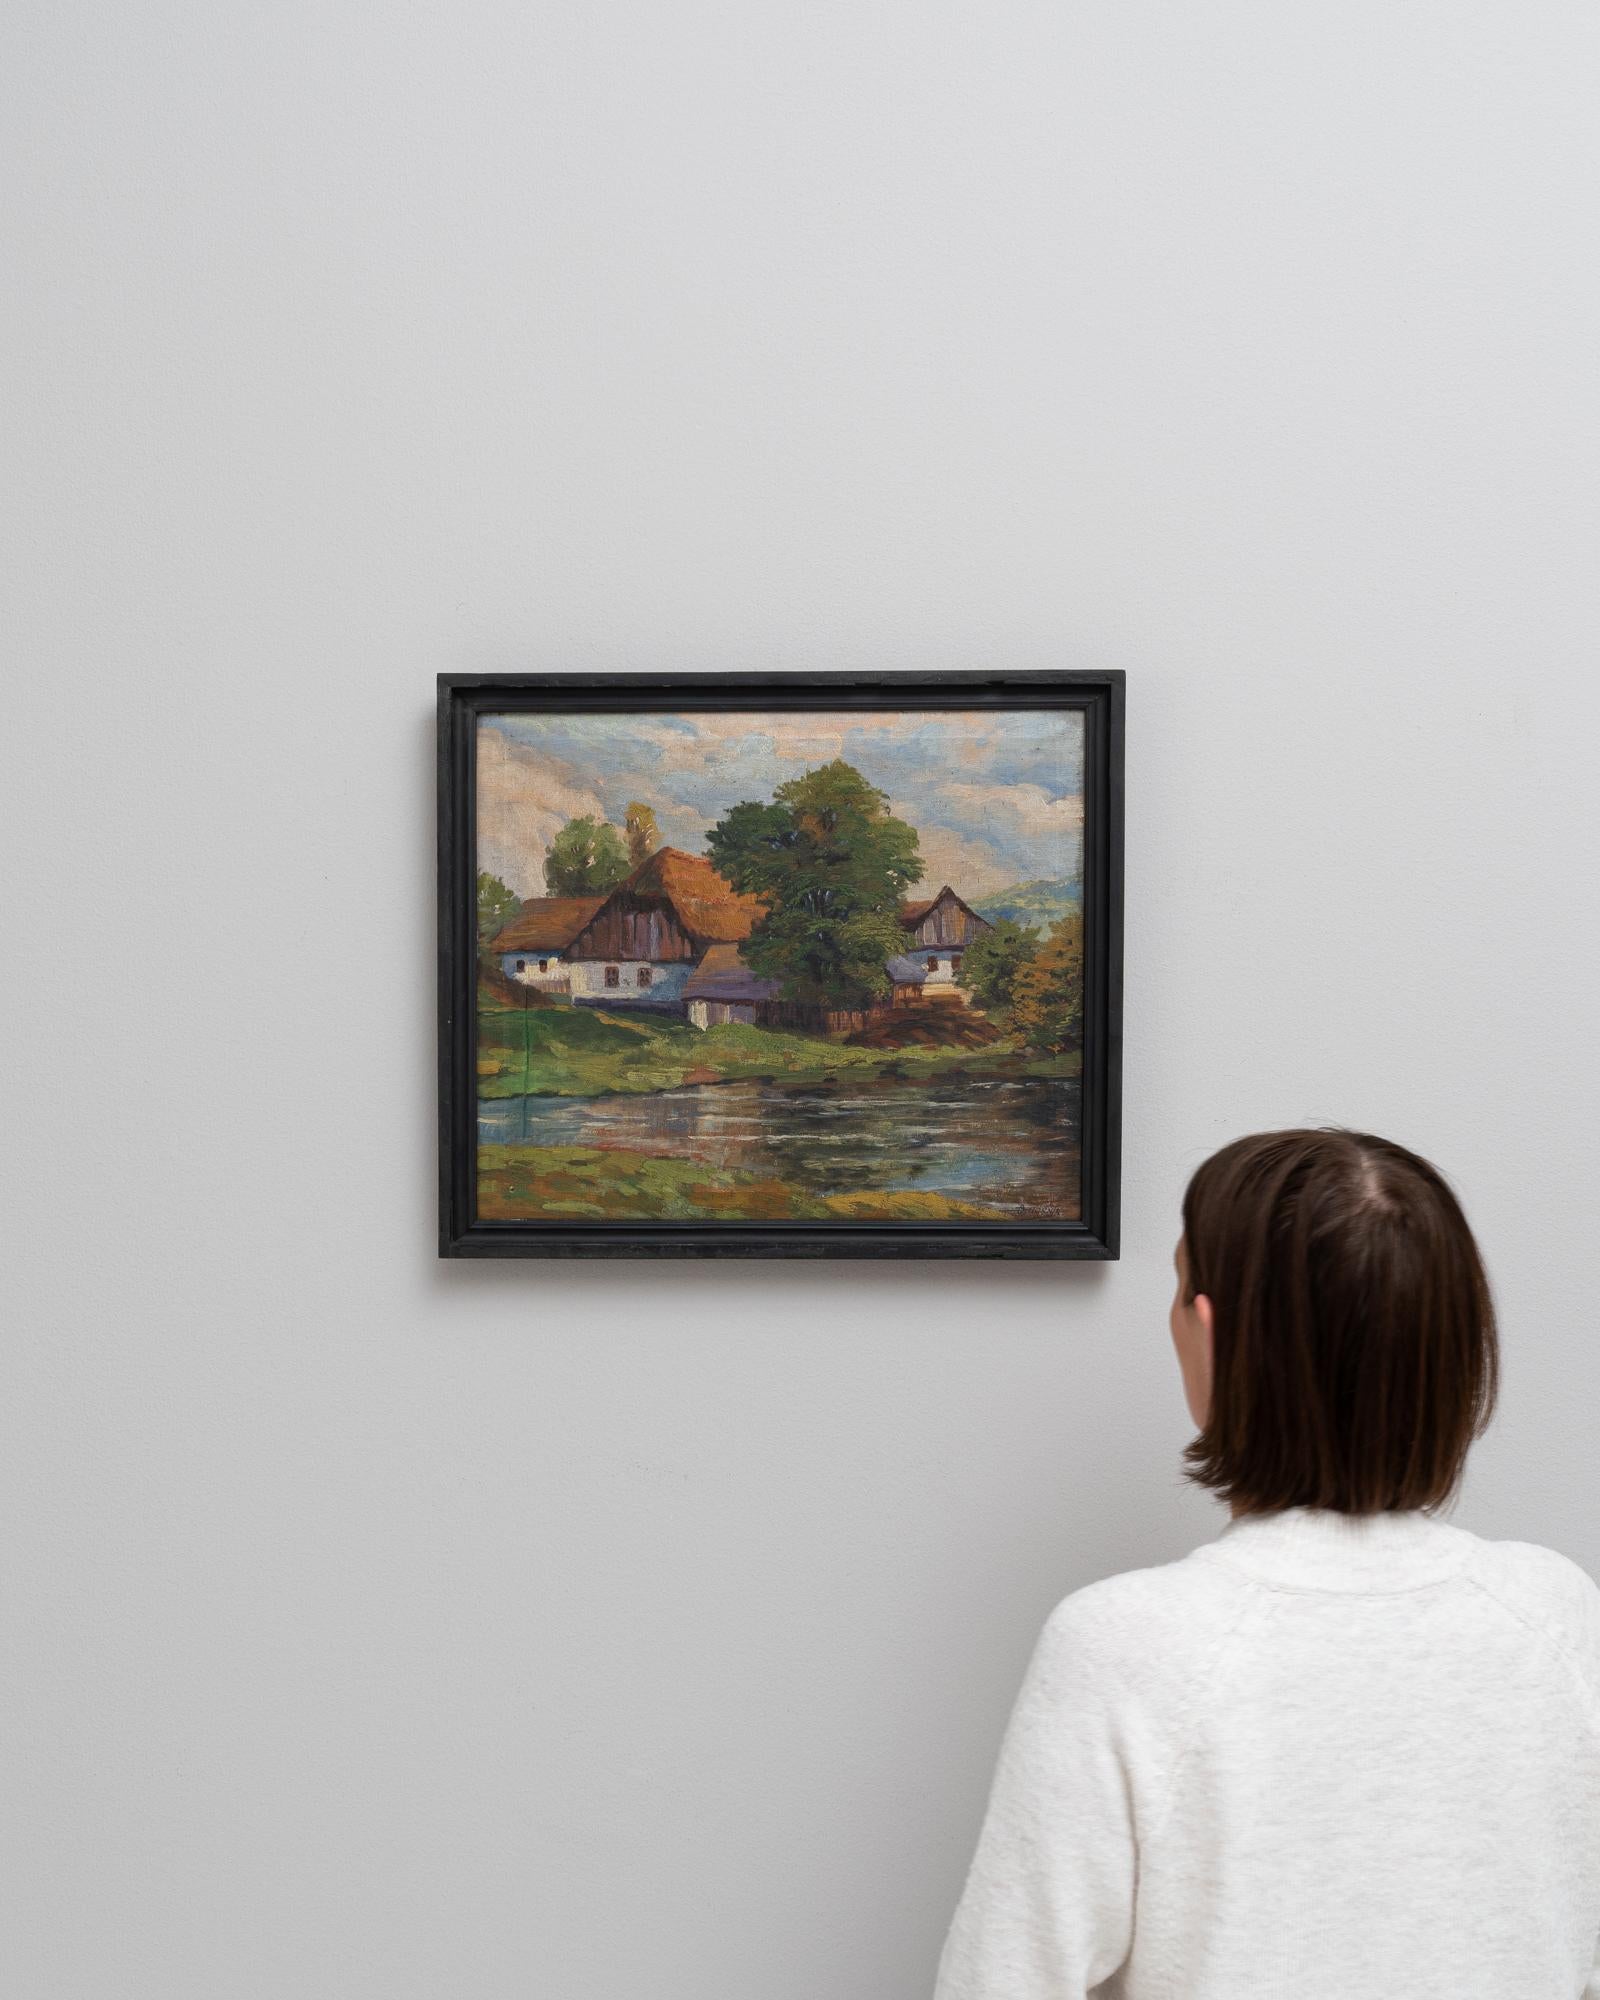 This charming early 20th Century Belgian painting captures the idyllic essence of rural life. The artwork portrays a quaint village scene, where cozy cottages with thatched roofs nestle amidst lush greenery, reflecting a serene existence by the